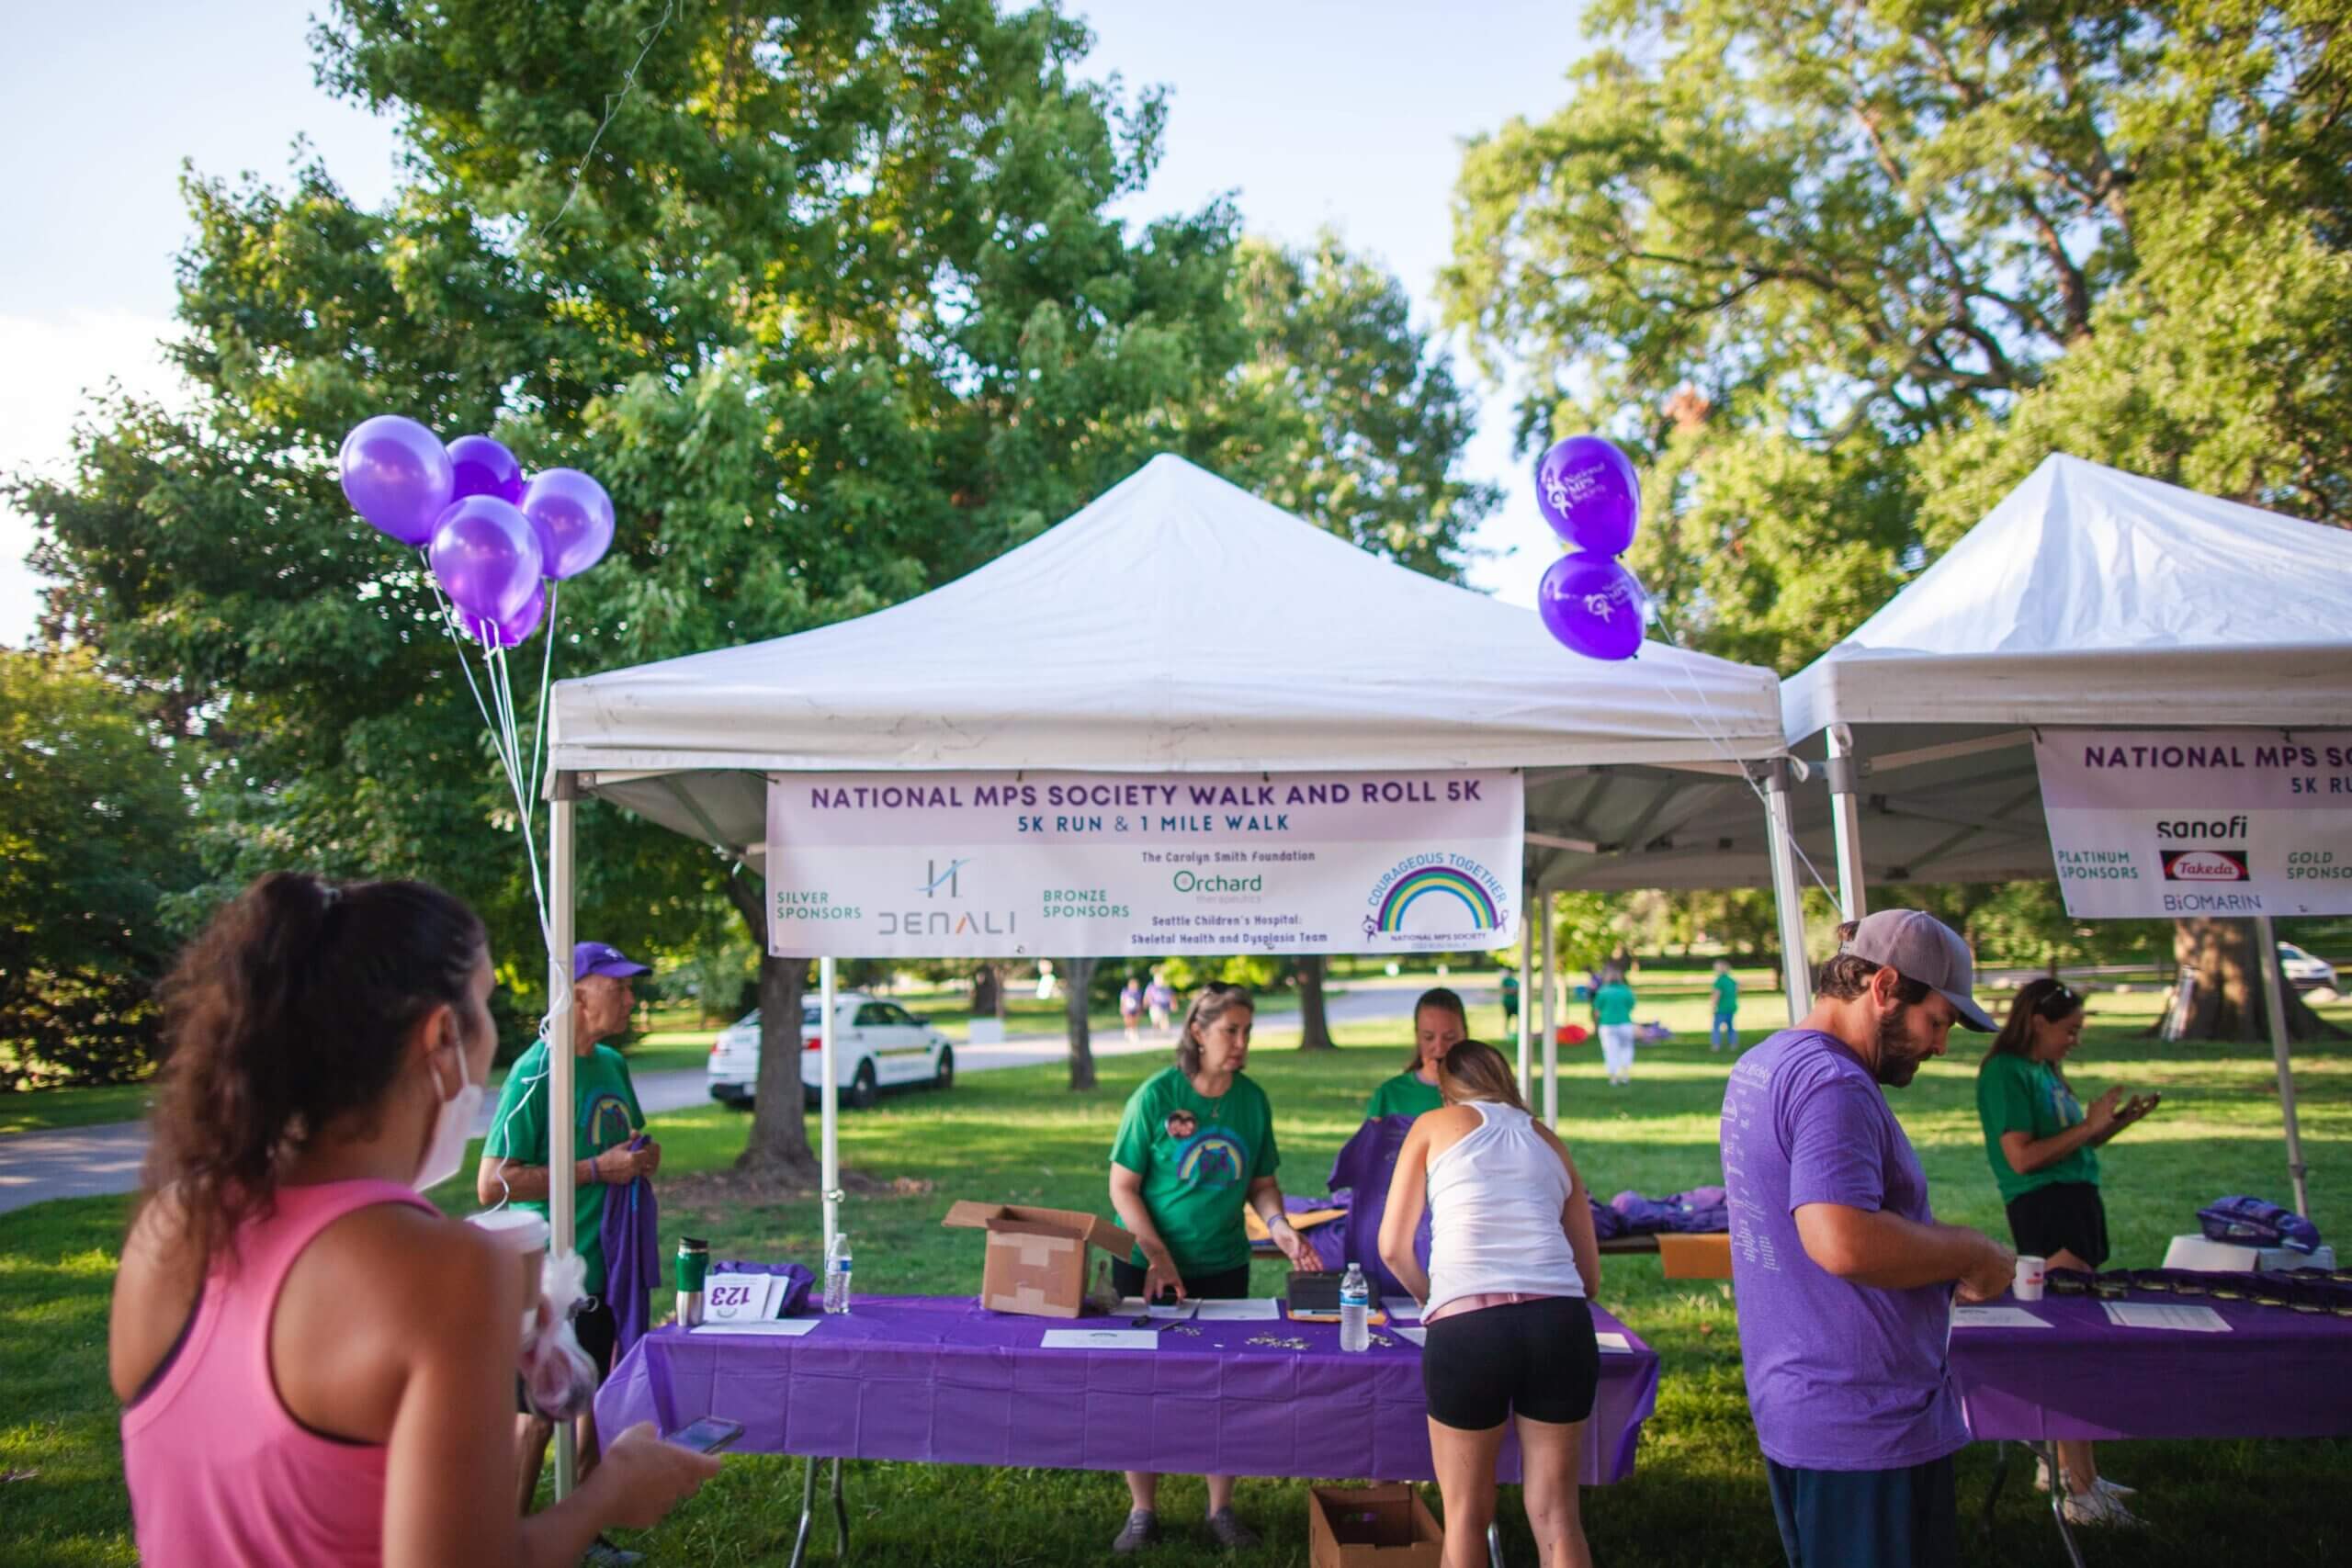 A booth with purple balloons at an MPS 5k event